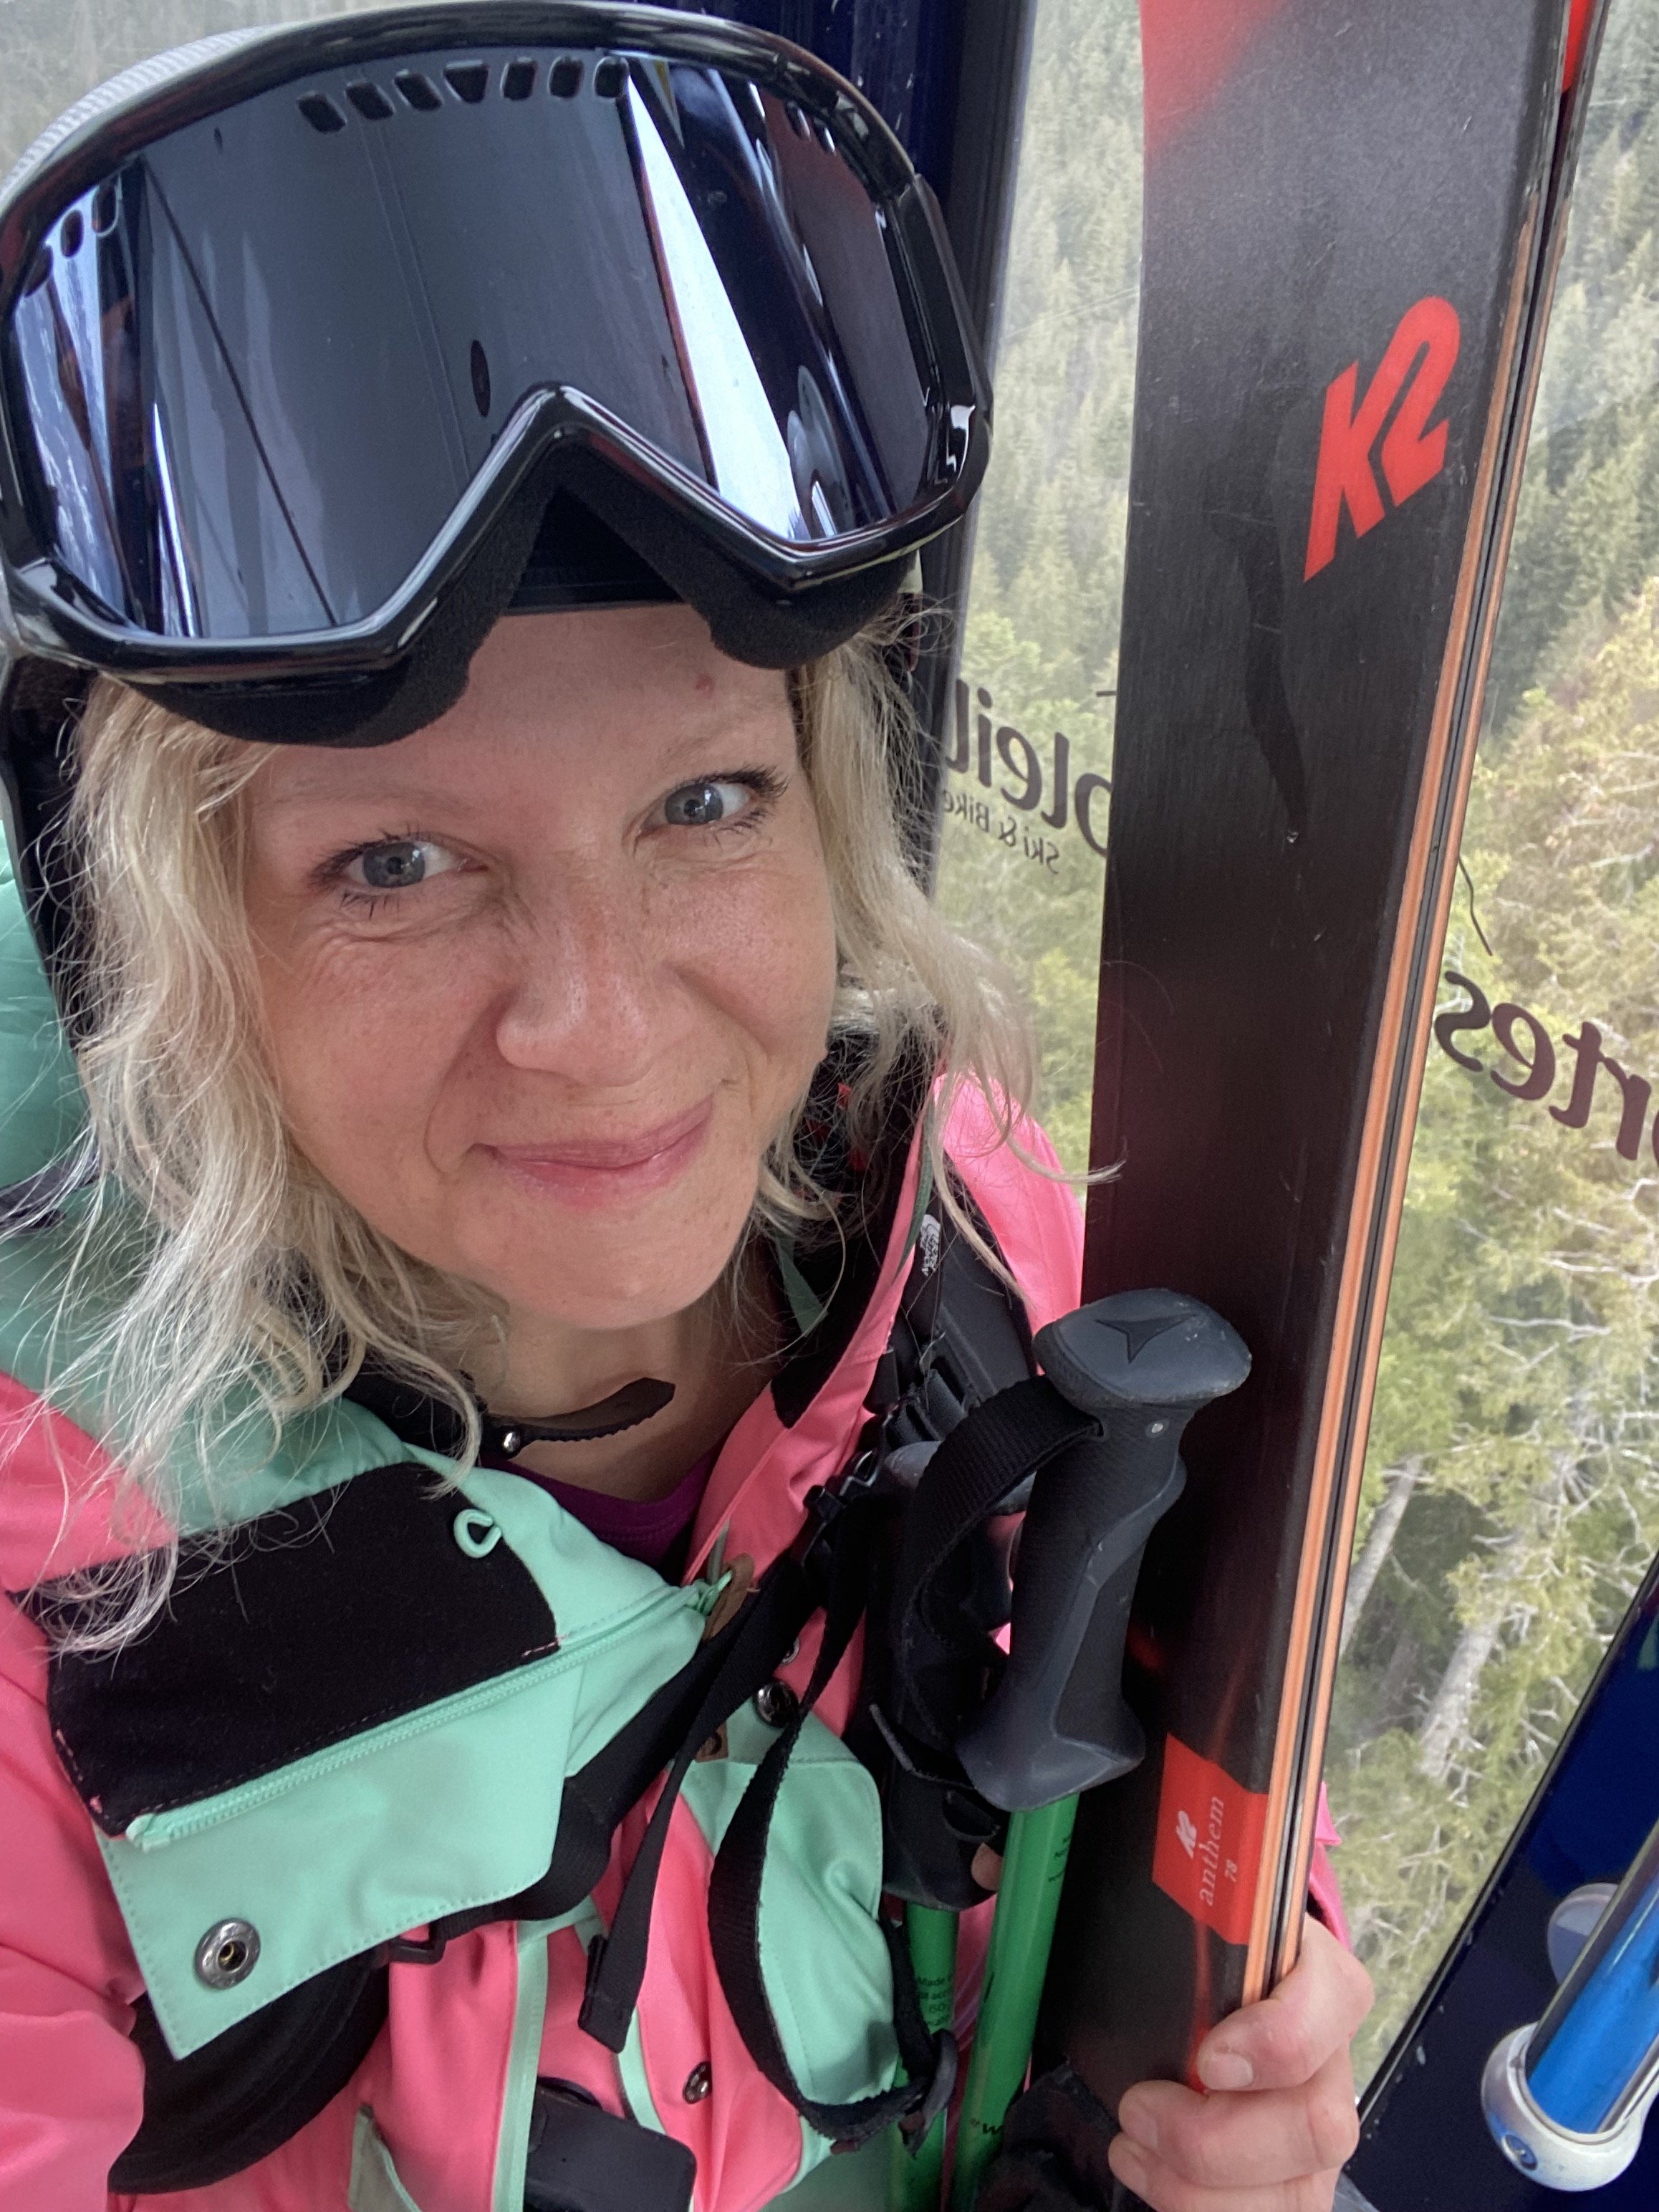 Gail smiling in the Gondola up to Avoriaz holding skis in one hand